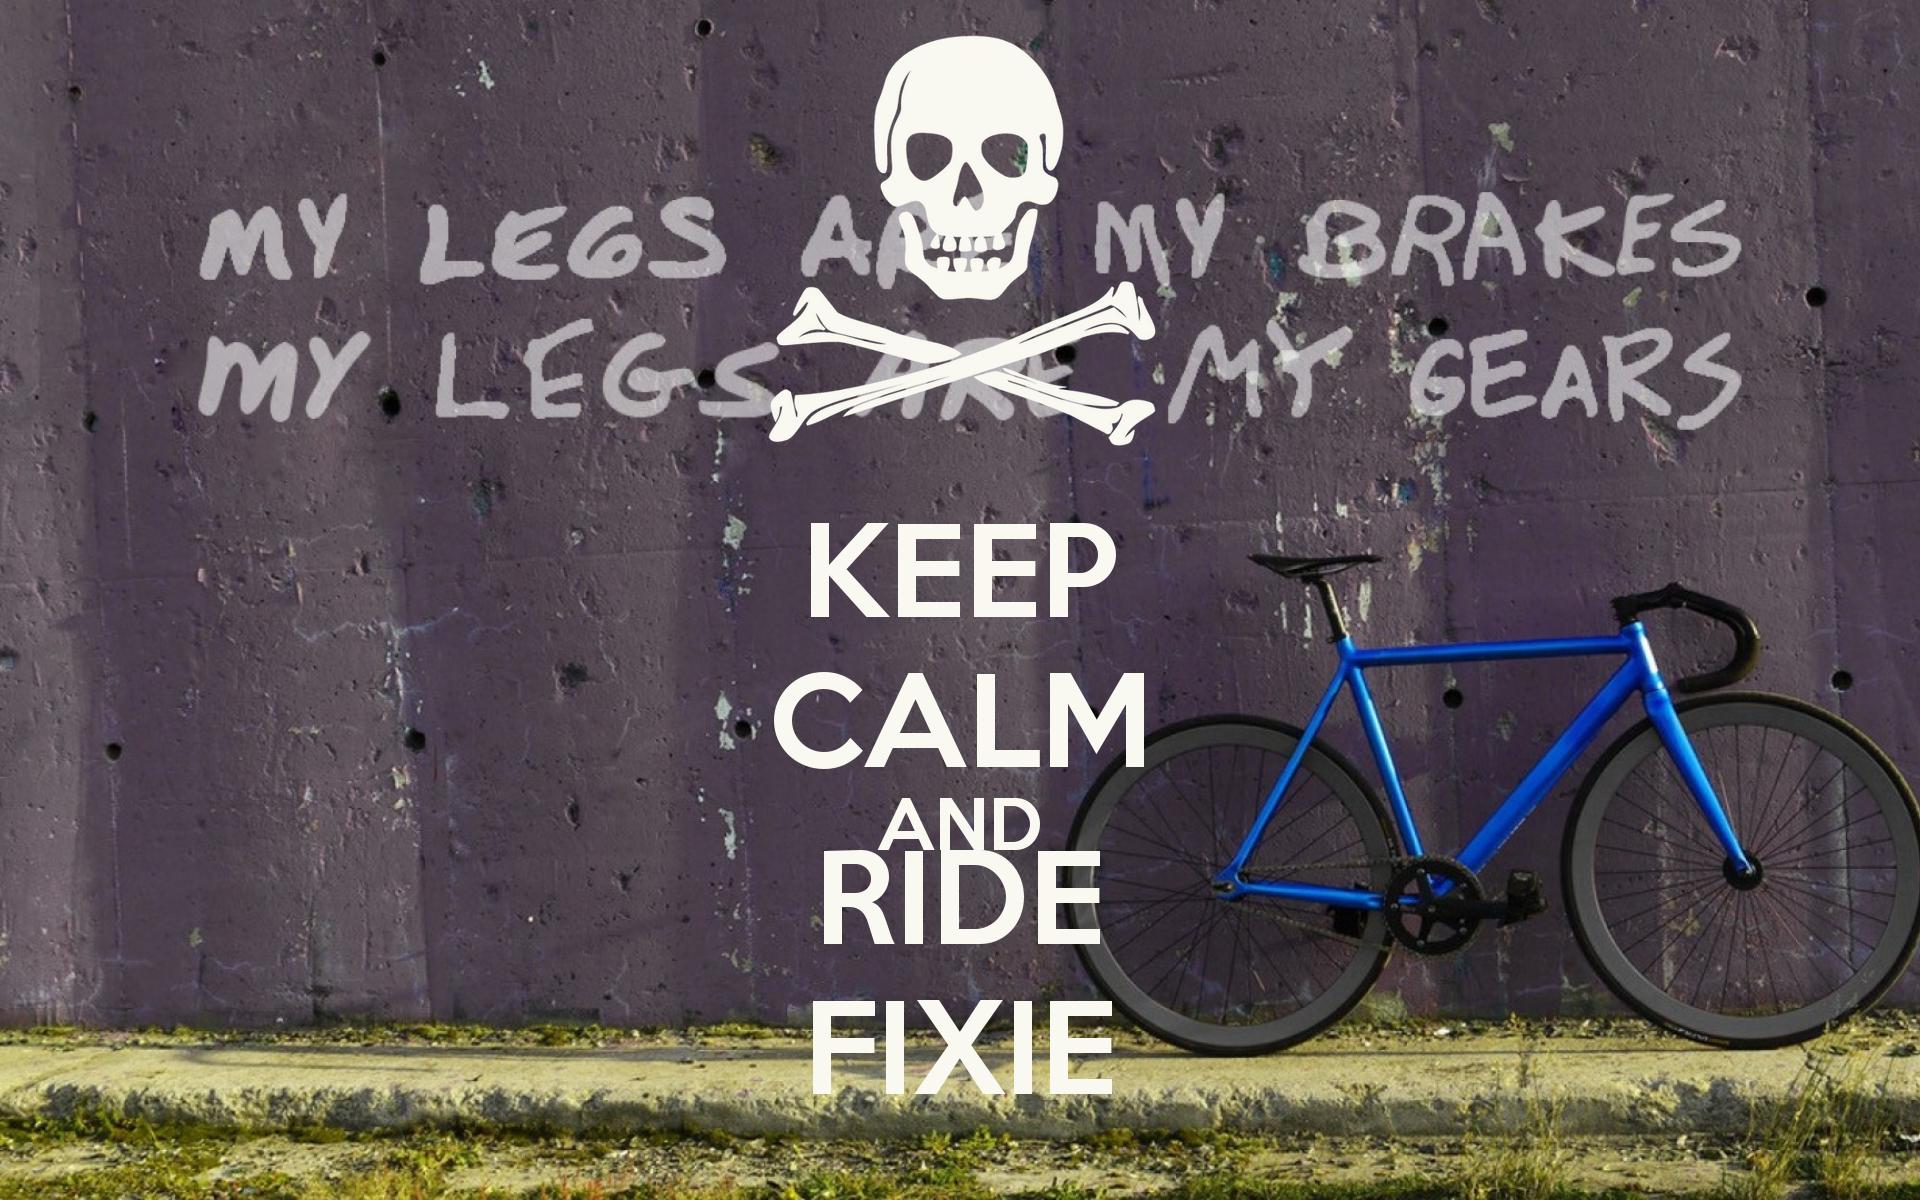 KEEP CALM AND RIDE FIXIE CALM AND CARRY ON Image Generator